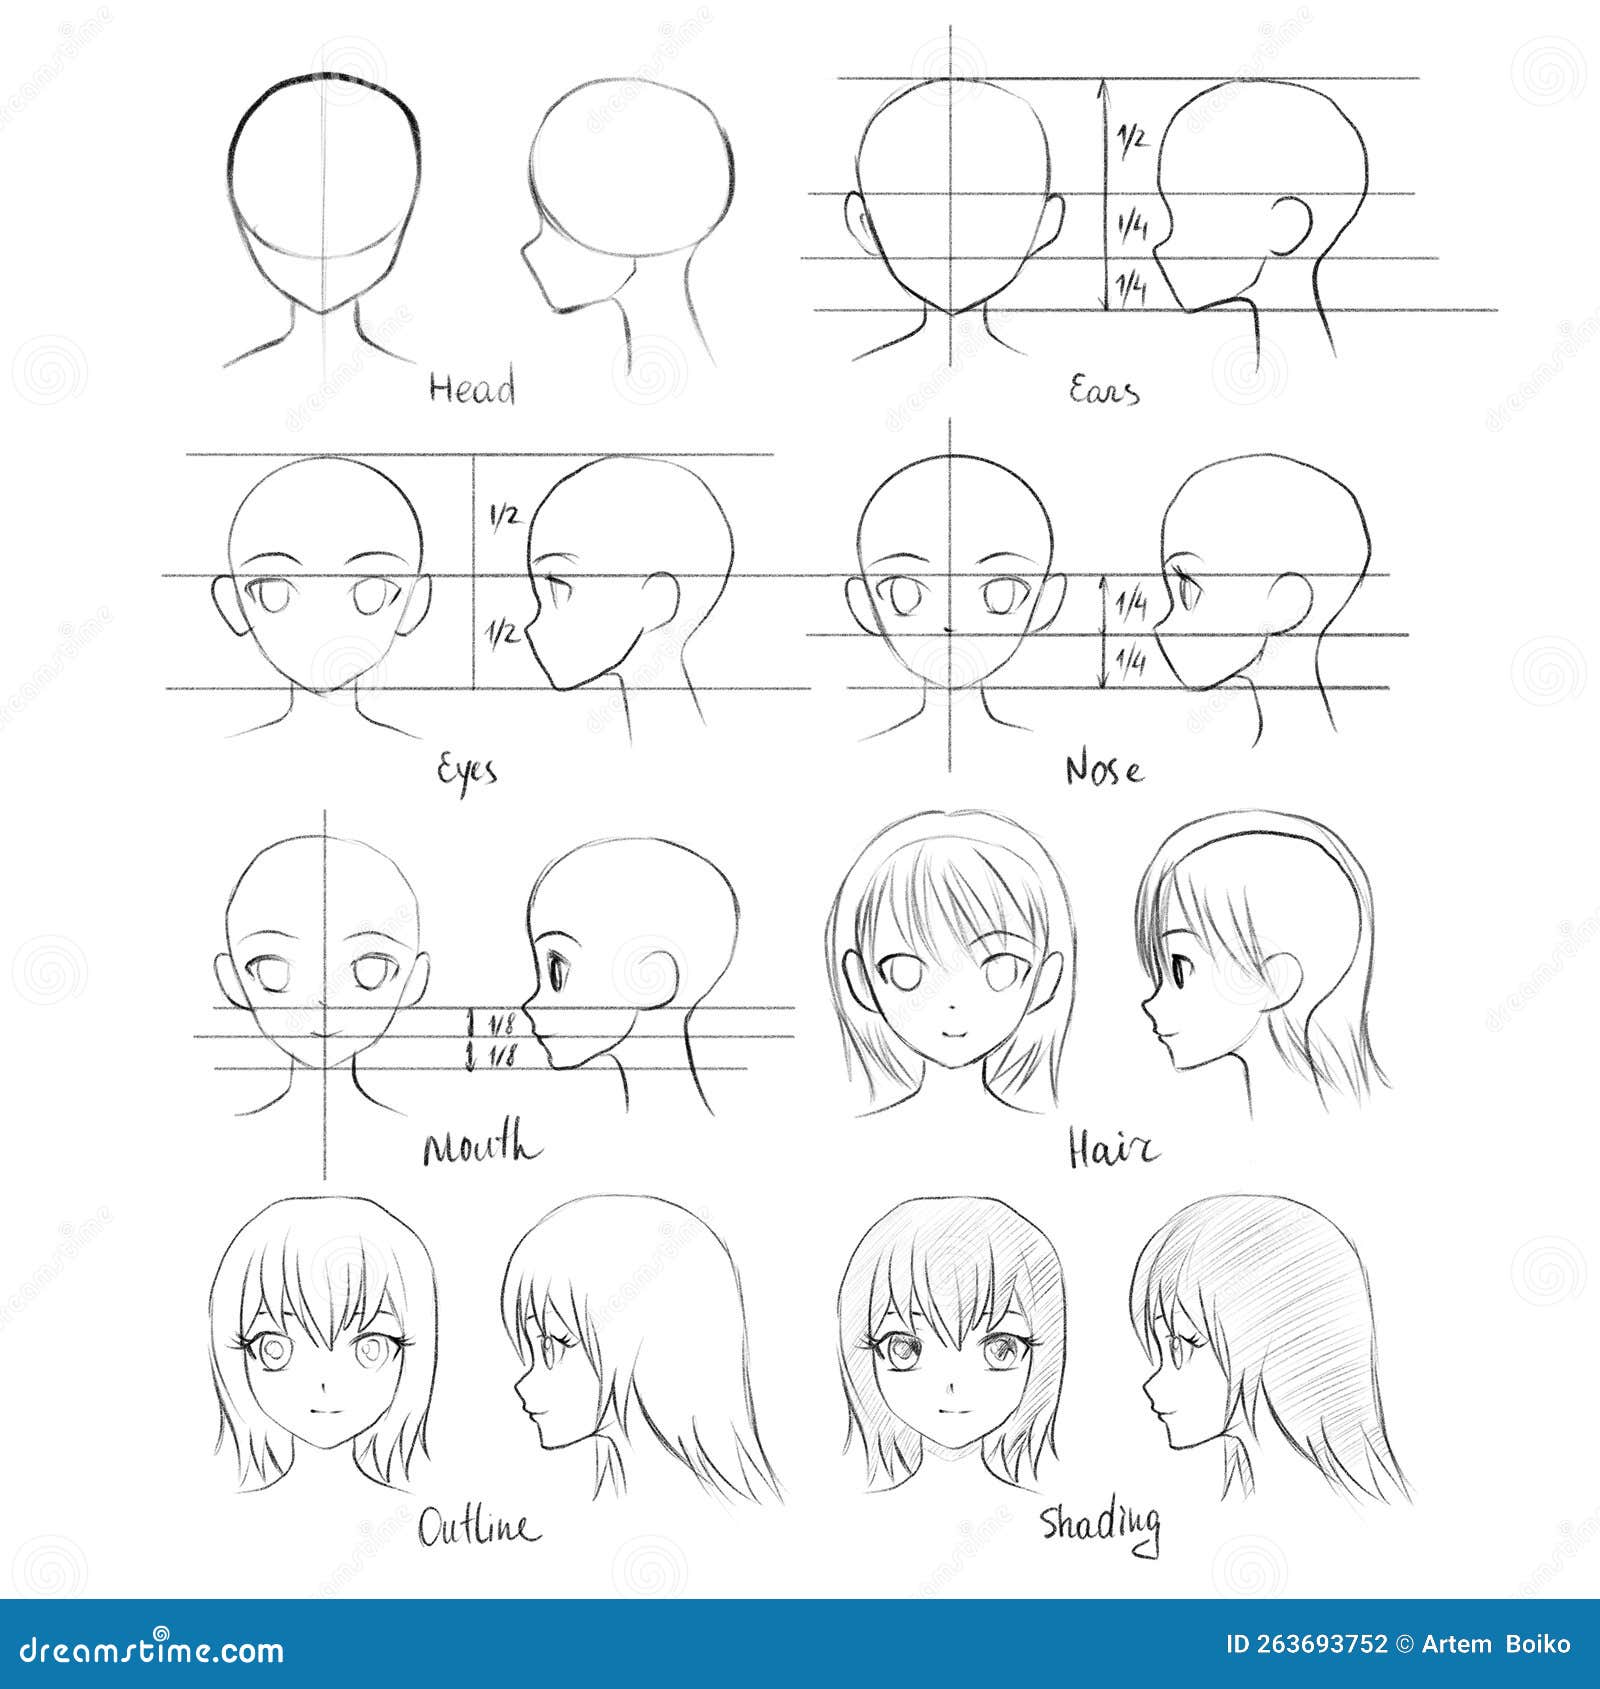 How to draw anime girl, How to draw for beginners, Cute anime drawing  tutorial, Anime drawing, How to draw anime girl, How to draw for  beginners